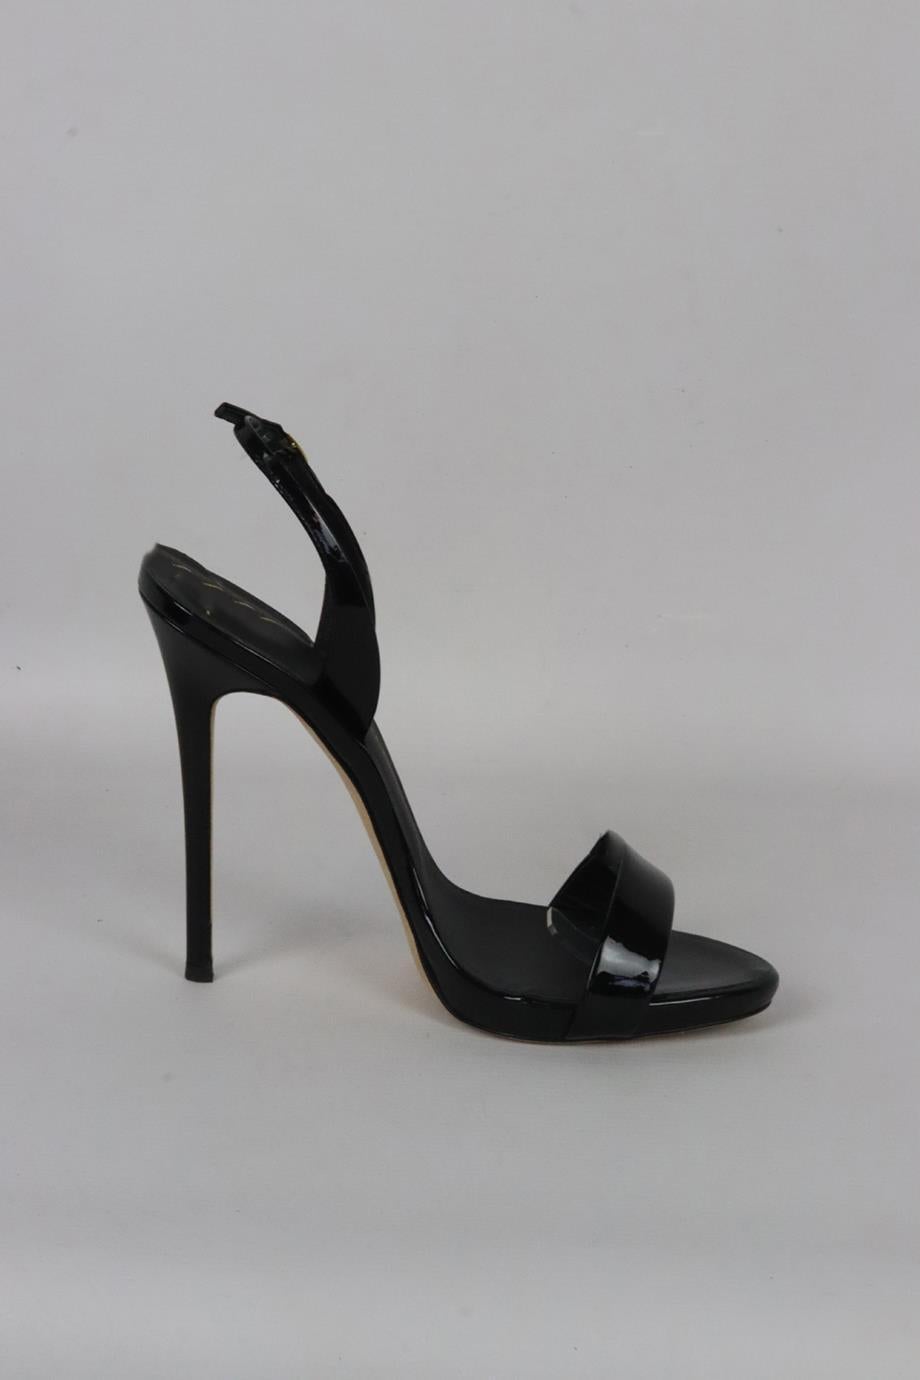 Guiseppe Zanotti patent leather sandals. Black. Pull on. Does not come with dustbag or box. Size: EU 38.5 (UK 5.5, US 8.5). Insole: 9.6 in. Heel Height: 3.6 in. Platform: 0.5 in. Very good condition - Some wear to soles; see pictures